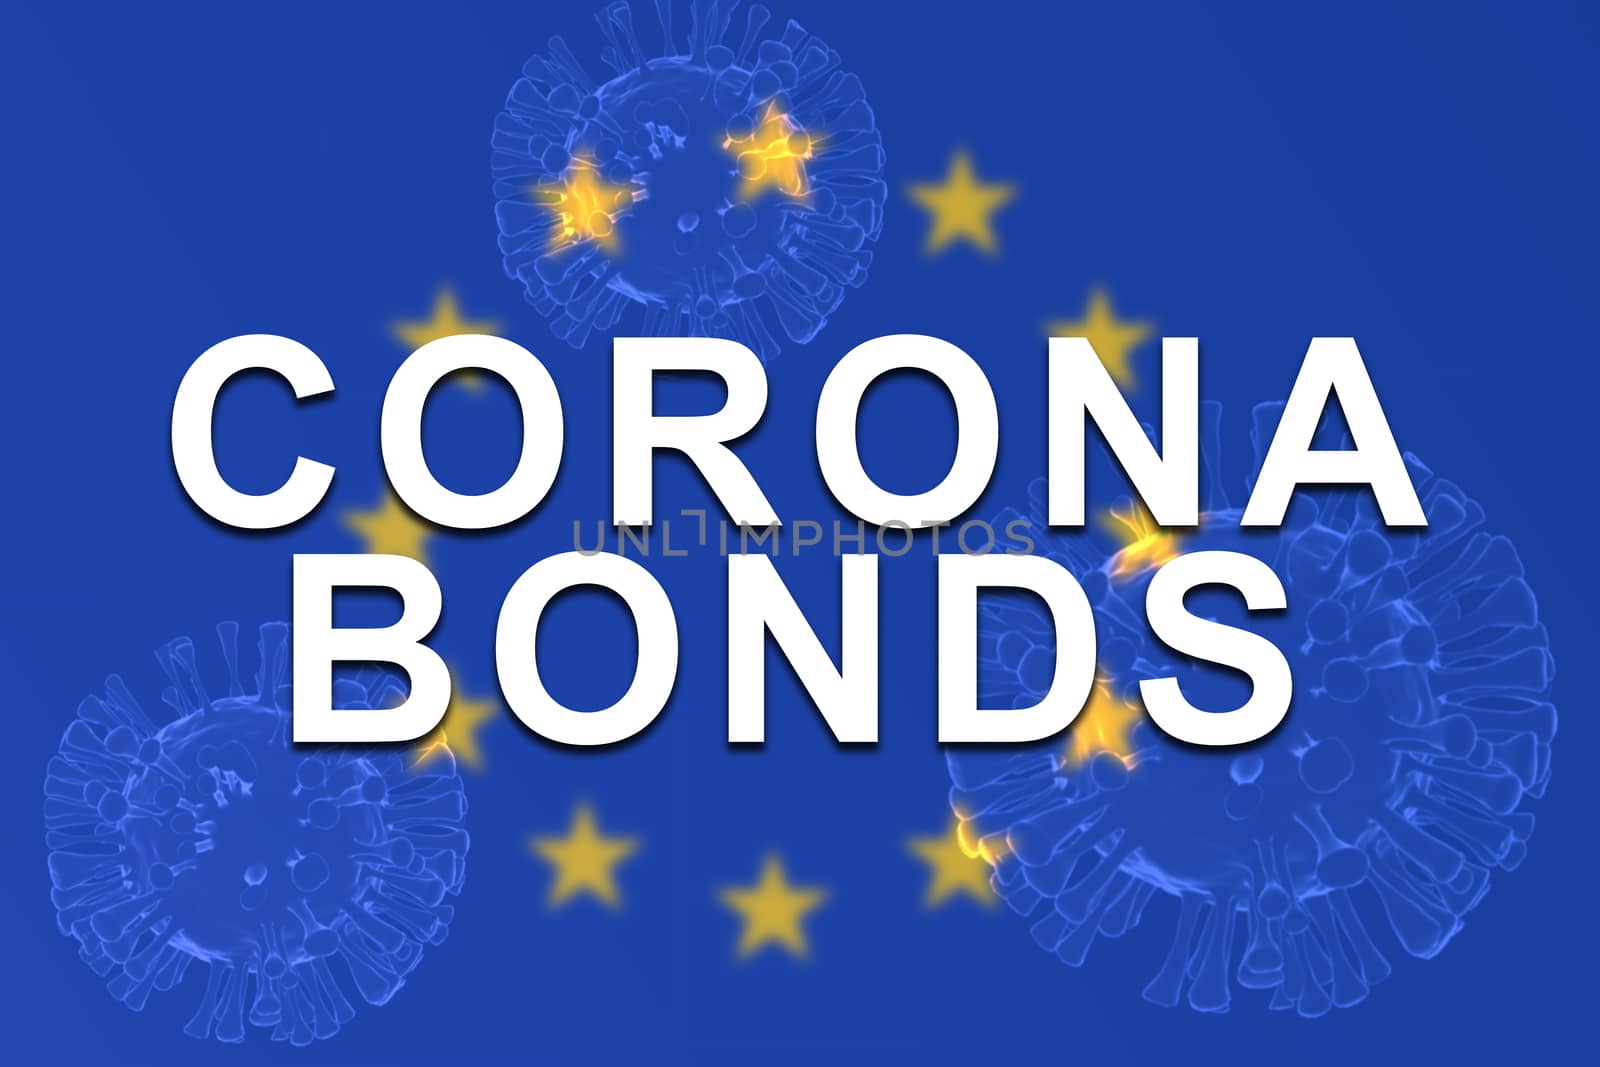 Corona Bonds on EU or European Union flag with 3d rendered illustration of virus as background